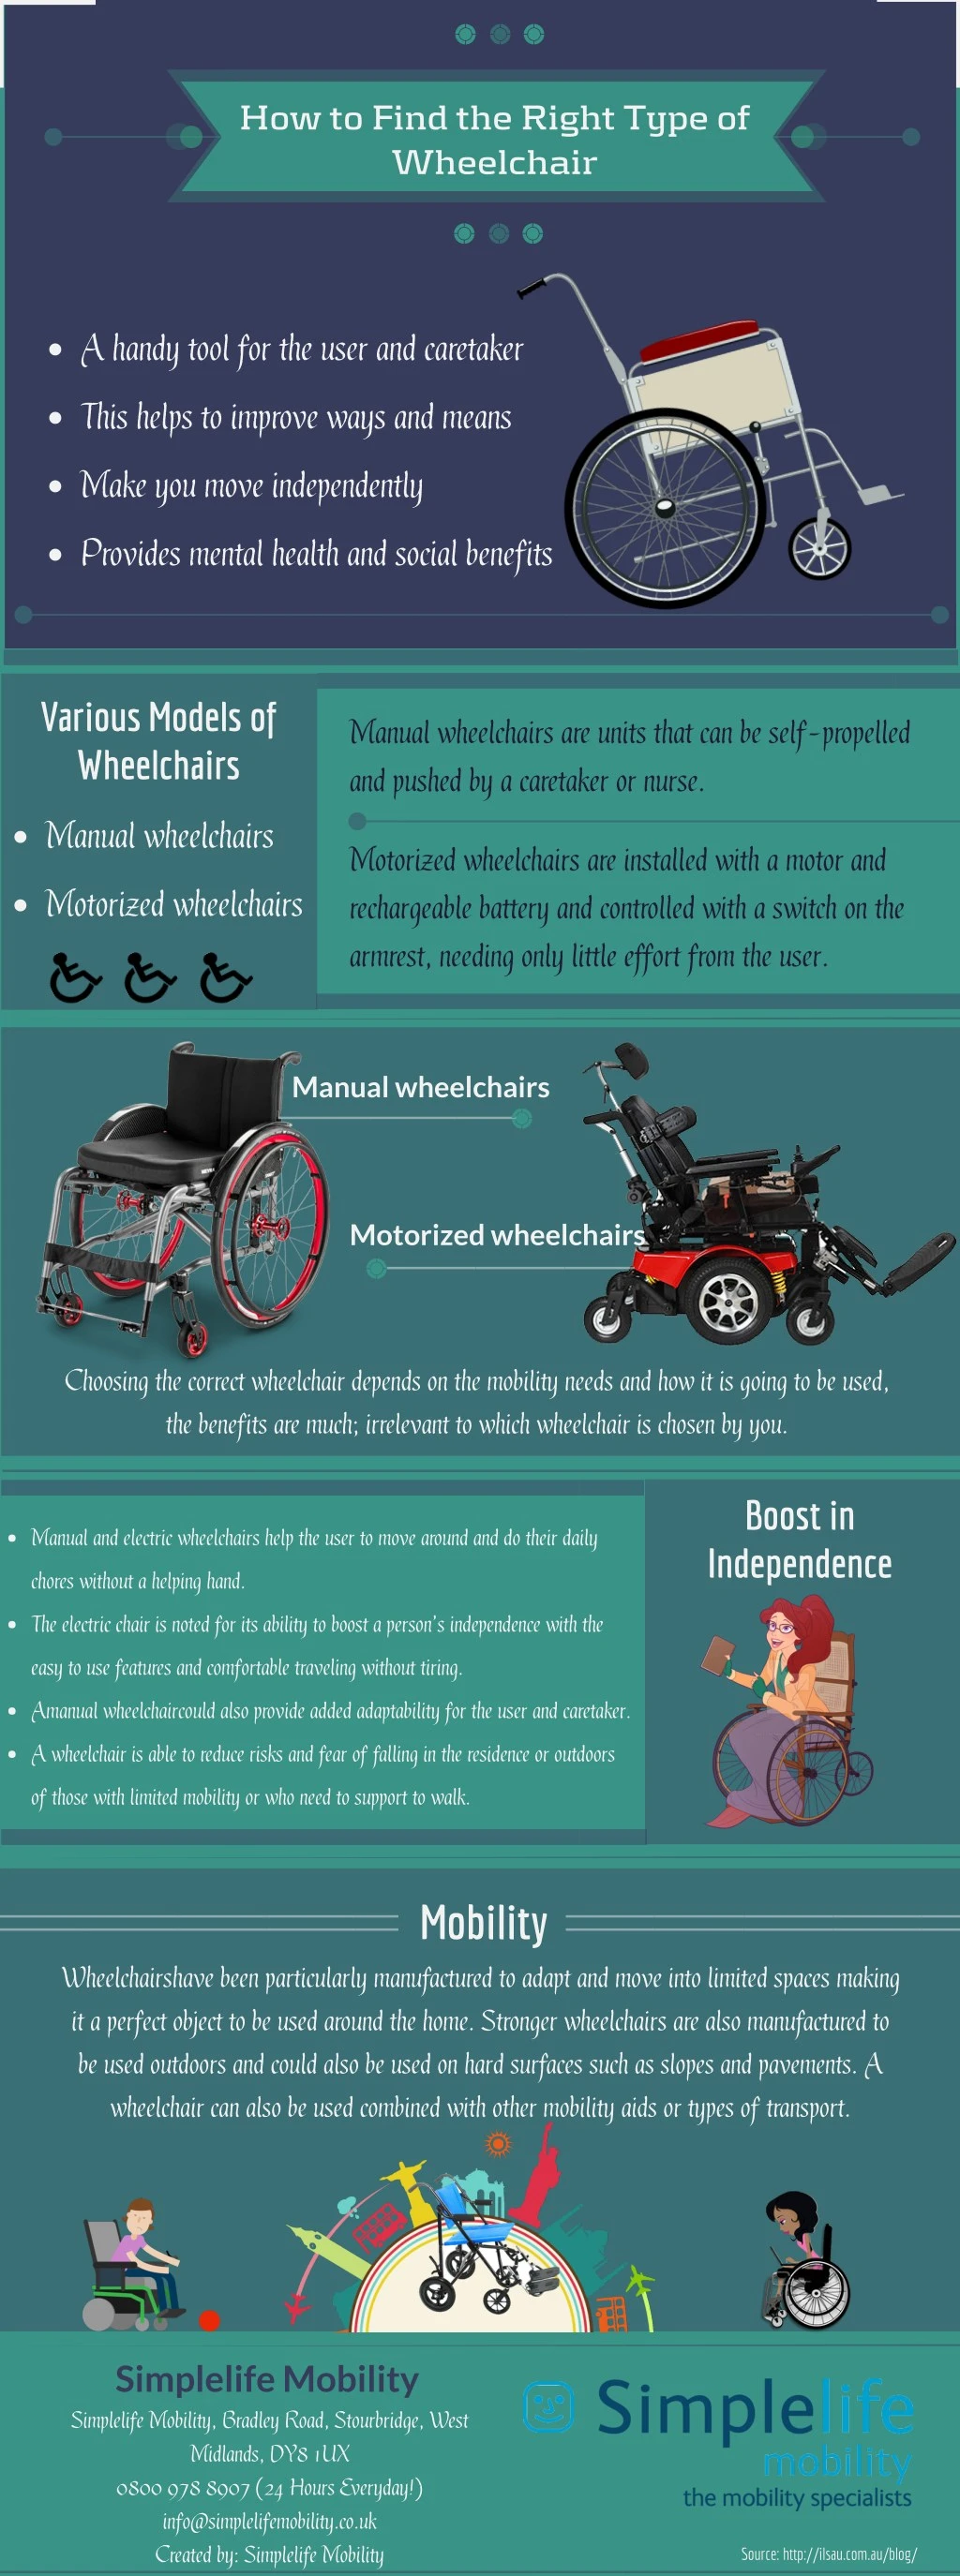 how to find the right type of wheelchair